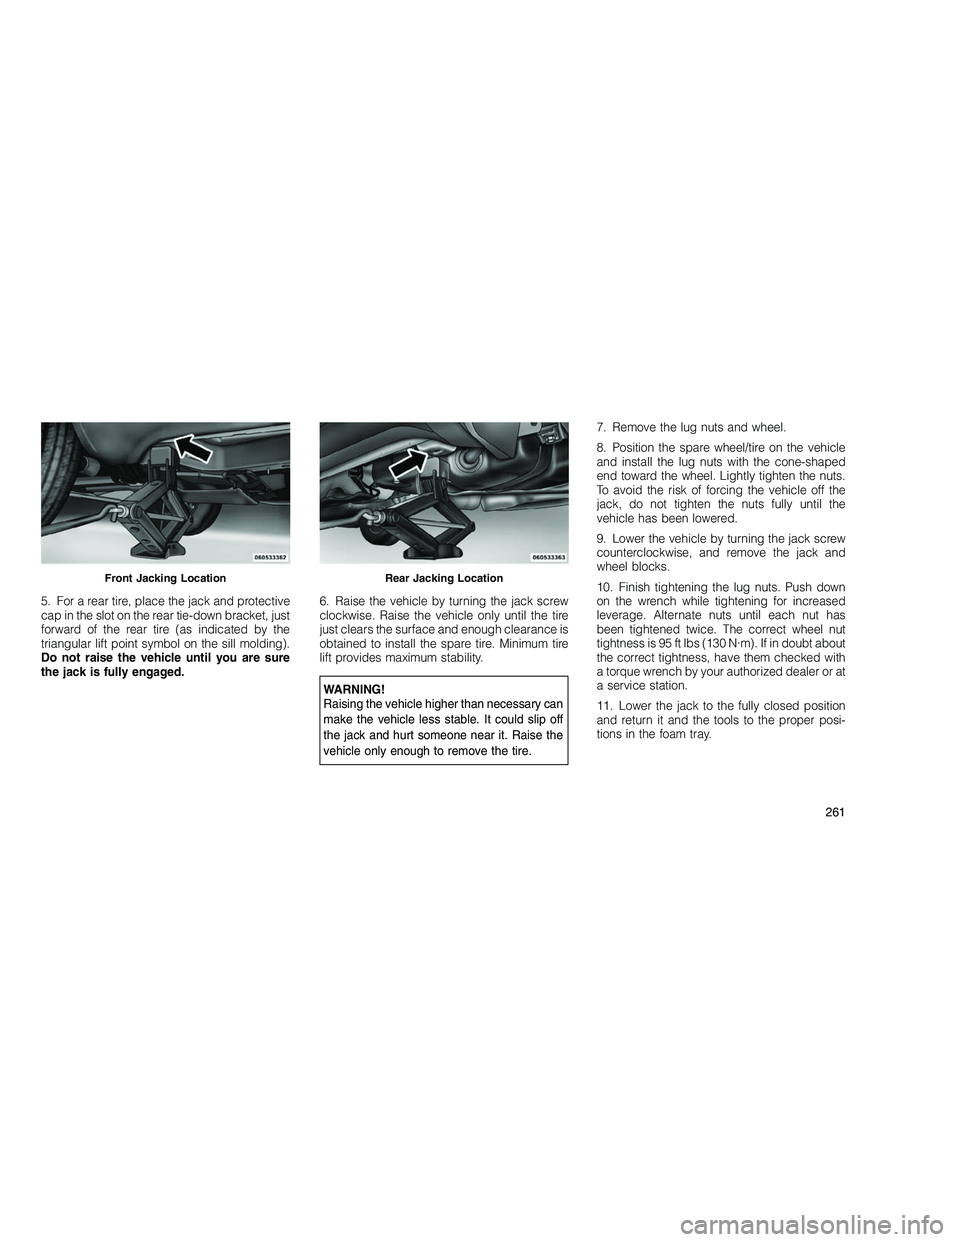 JEEP GRAND CHEROKEE 2010  Owner handbook (in English) 
5. For a rear tire, place the jack and protective
cap in the slot on the rear tie-down bracket, just
forward of the rear tire (as indicated by the
triangular lift point symbol on the sill molding).
D